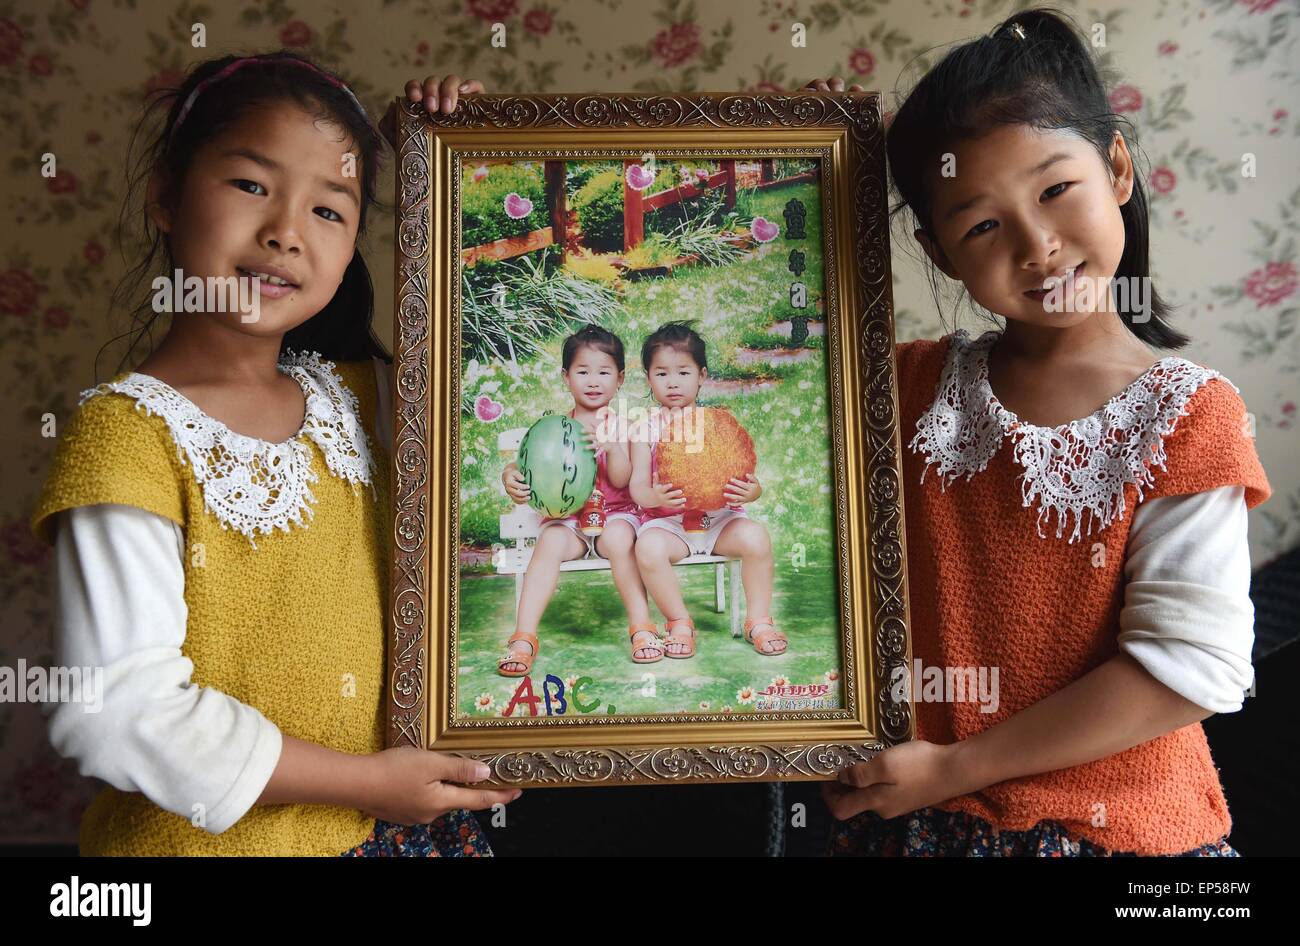 (150514) -- MOJIANG, May 14, 2015 (Xinhua) -- Twin sisters Jin Meixian (R) and Jin Huixian show a photo of four-year-old themselves in Mojiang Hani Autonomous County, southwest China's Yunnan Province, May 12, 2015.    Twin sisters Jin Meixian and Jin Huixian, 7, live with their mother Wang Fei, who opens a cold drink store. Their father does business in another province.    Meixian, the older, loves music and wants to be a musical teacher. Huixian likes dancing, and wants to go to college in Beijing. 'We always feel connected. Sometimes we find out that we are singing the same song, even the  Stock Photo